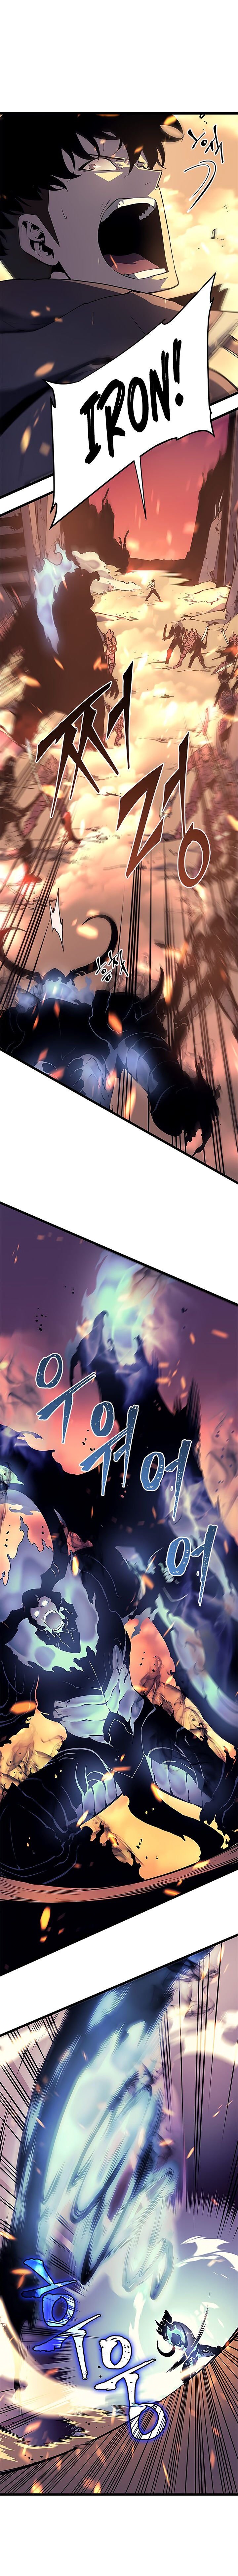 Solo Leveling Chapter 59 - Page 6